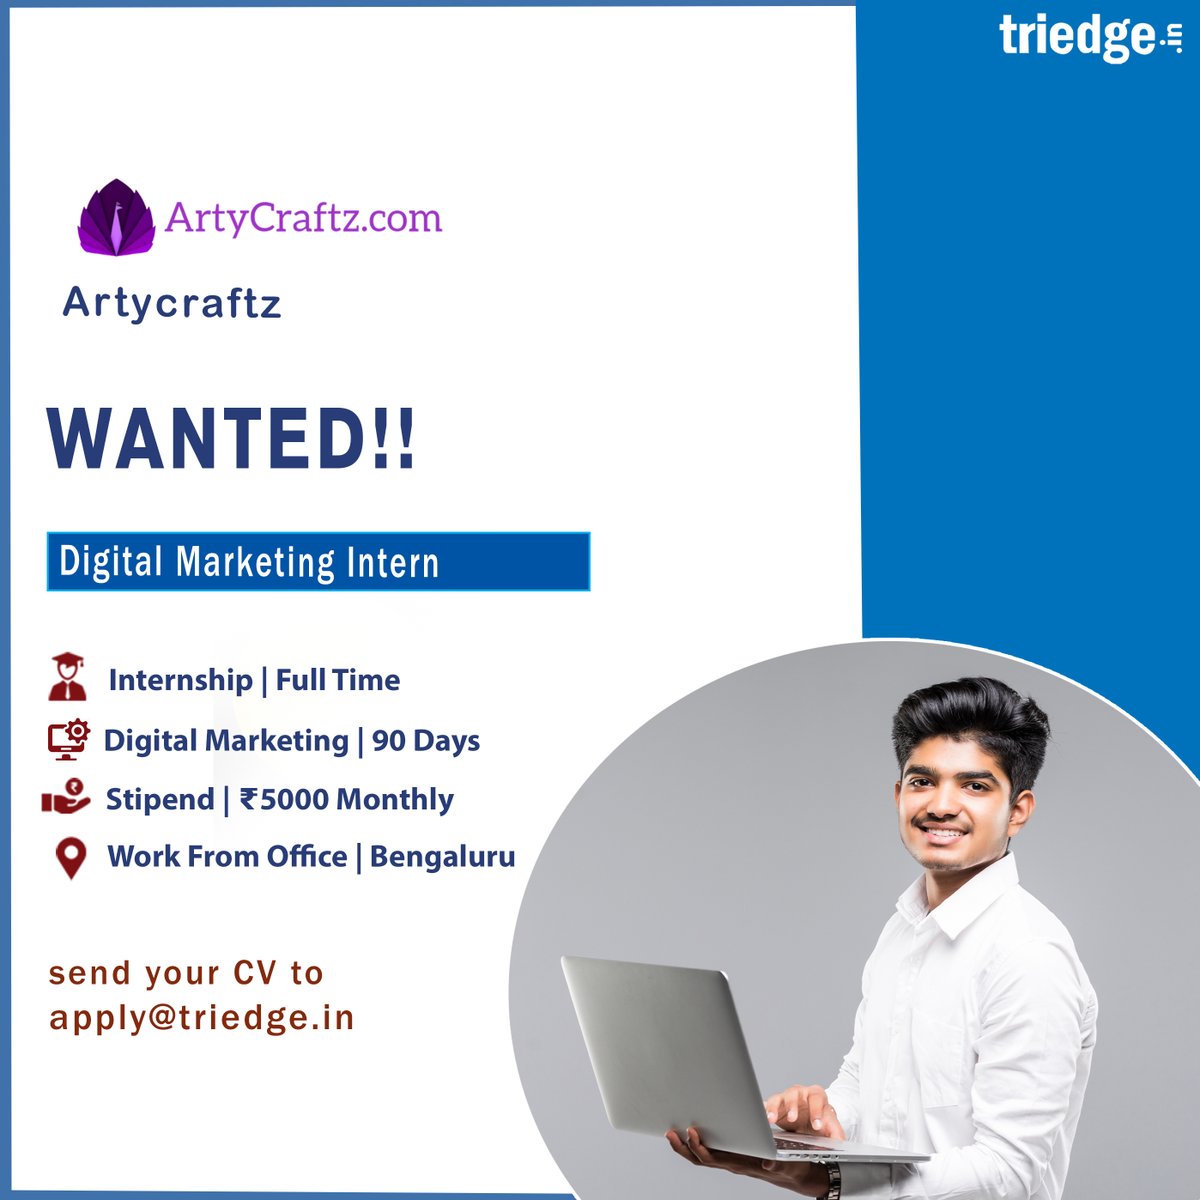 Artycraftz is providing job opportunities for Digital Marketing Intern

.Apply with your resume at apply@triedge.in.

#internship #marketing